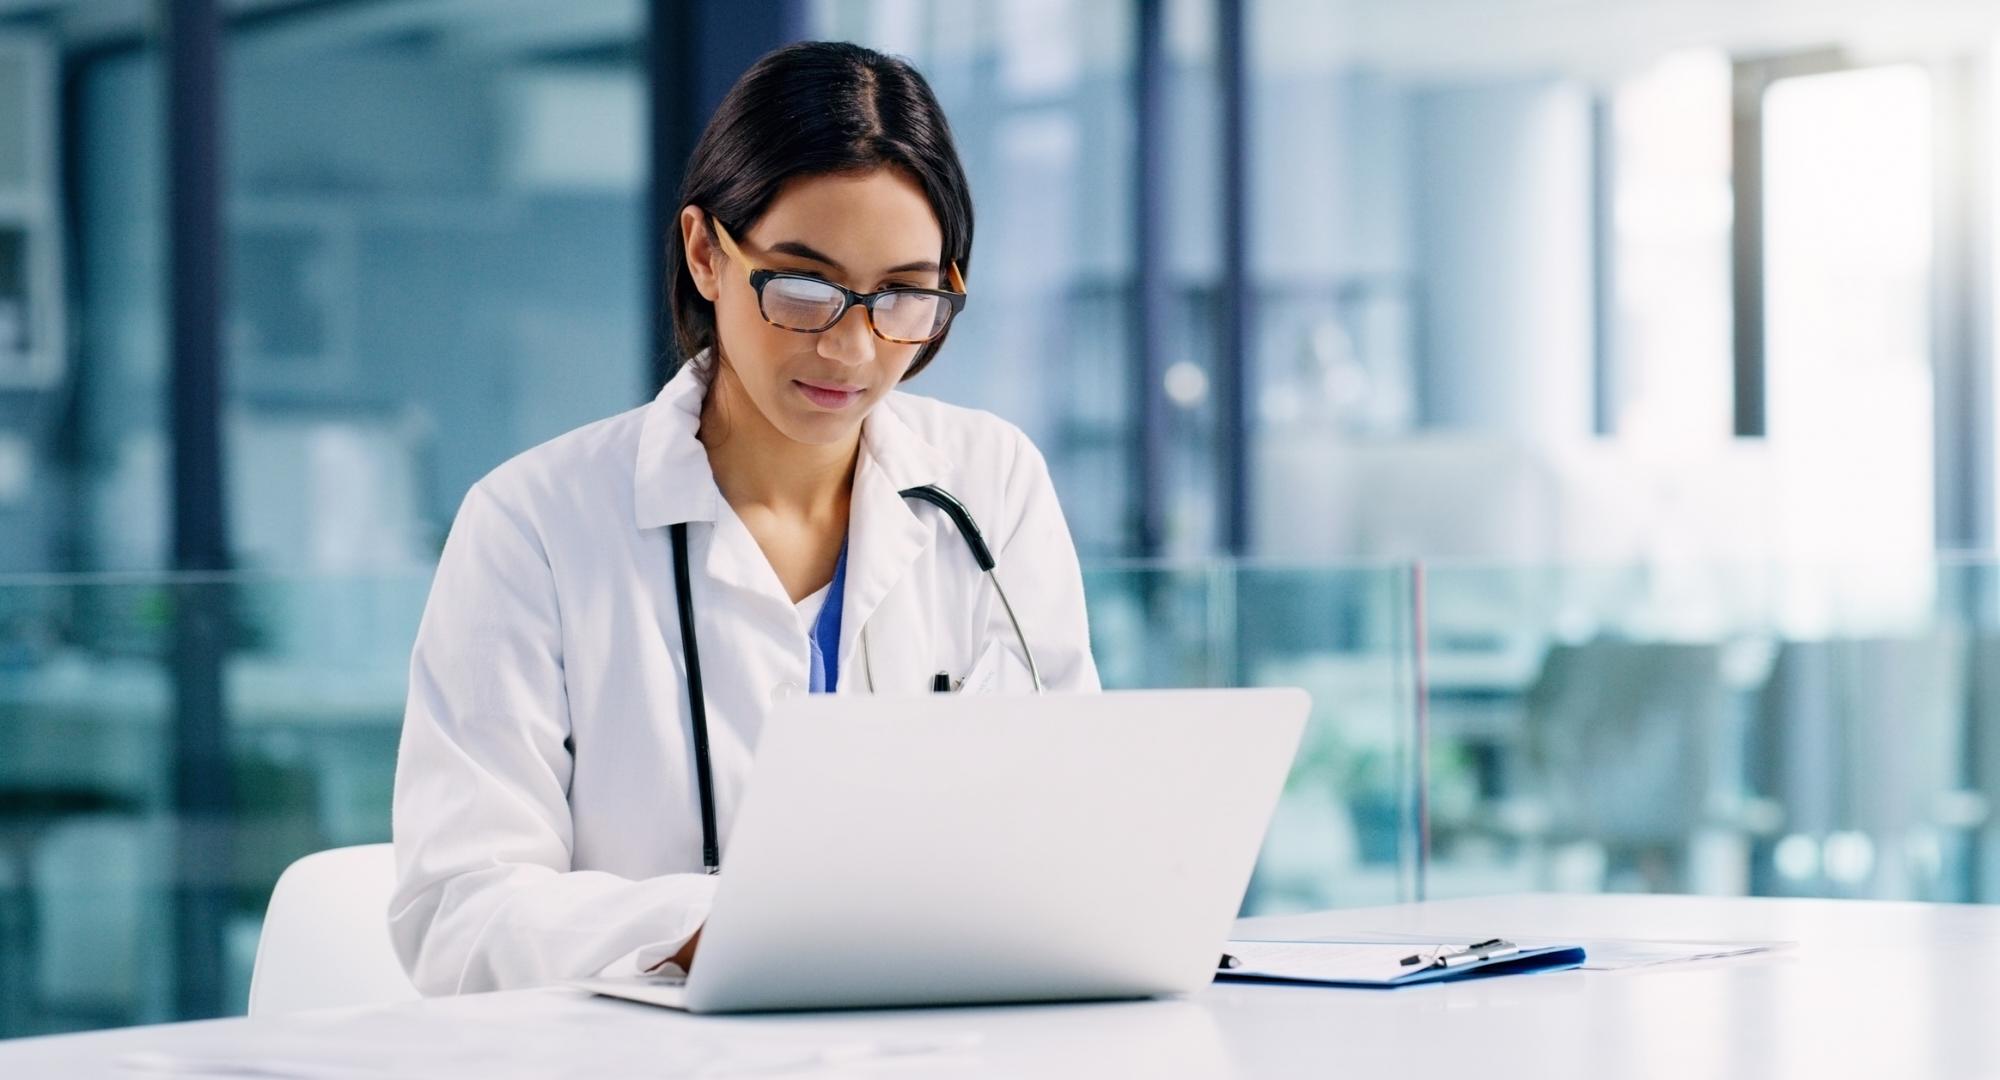 Female doctor looks at medical records on laptop.